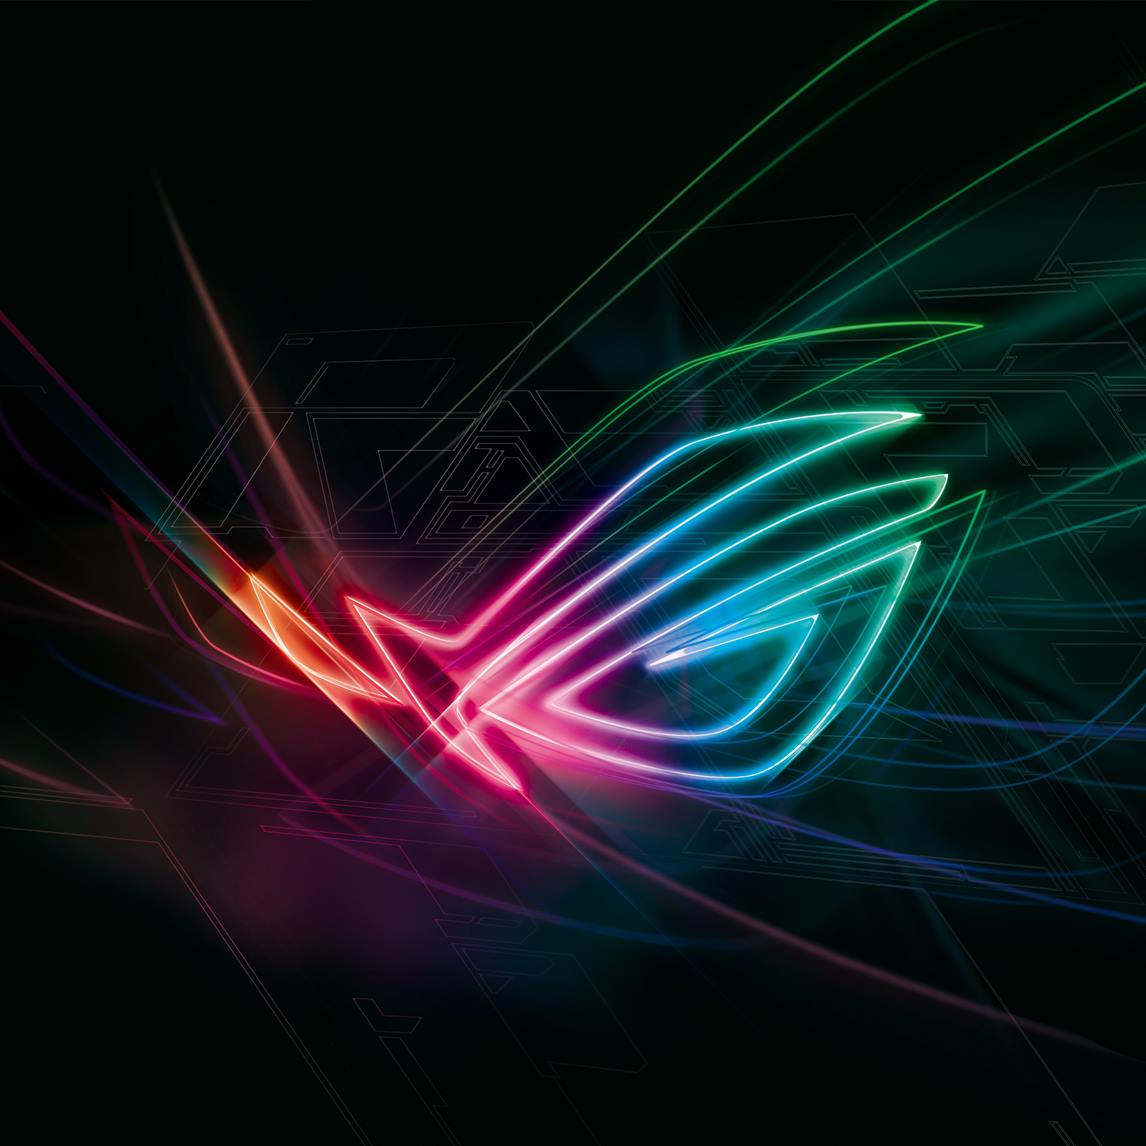 Download the ASUS ROG Phone II's wallpaper and live wallpaper